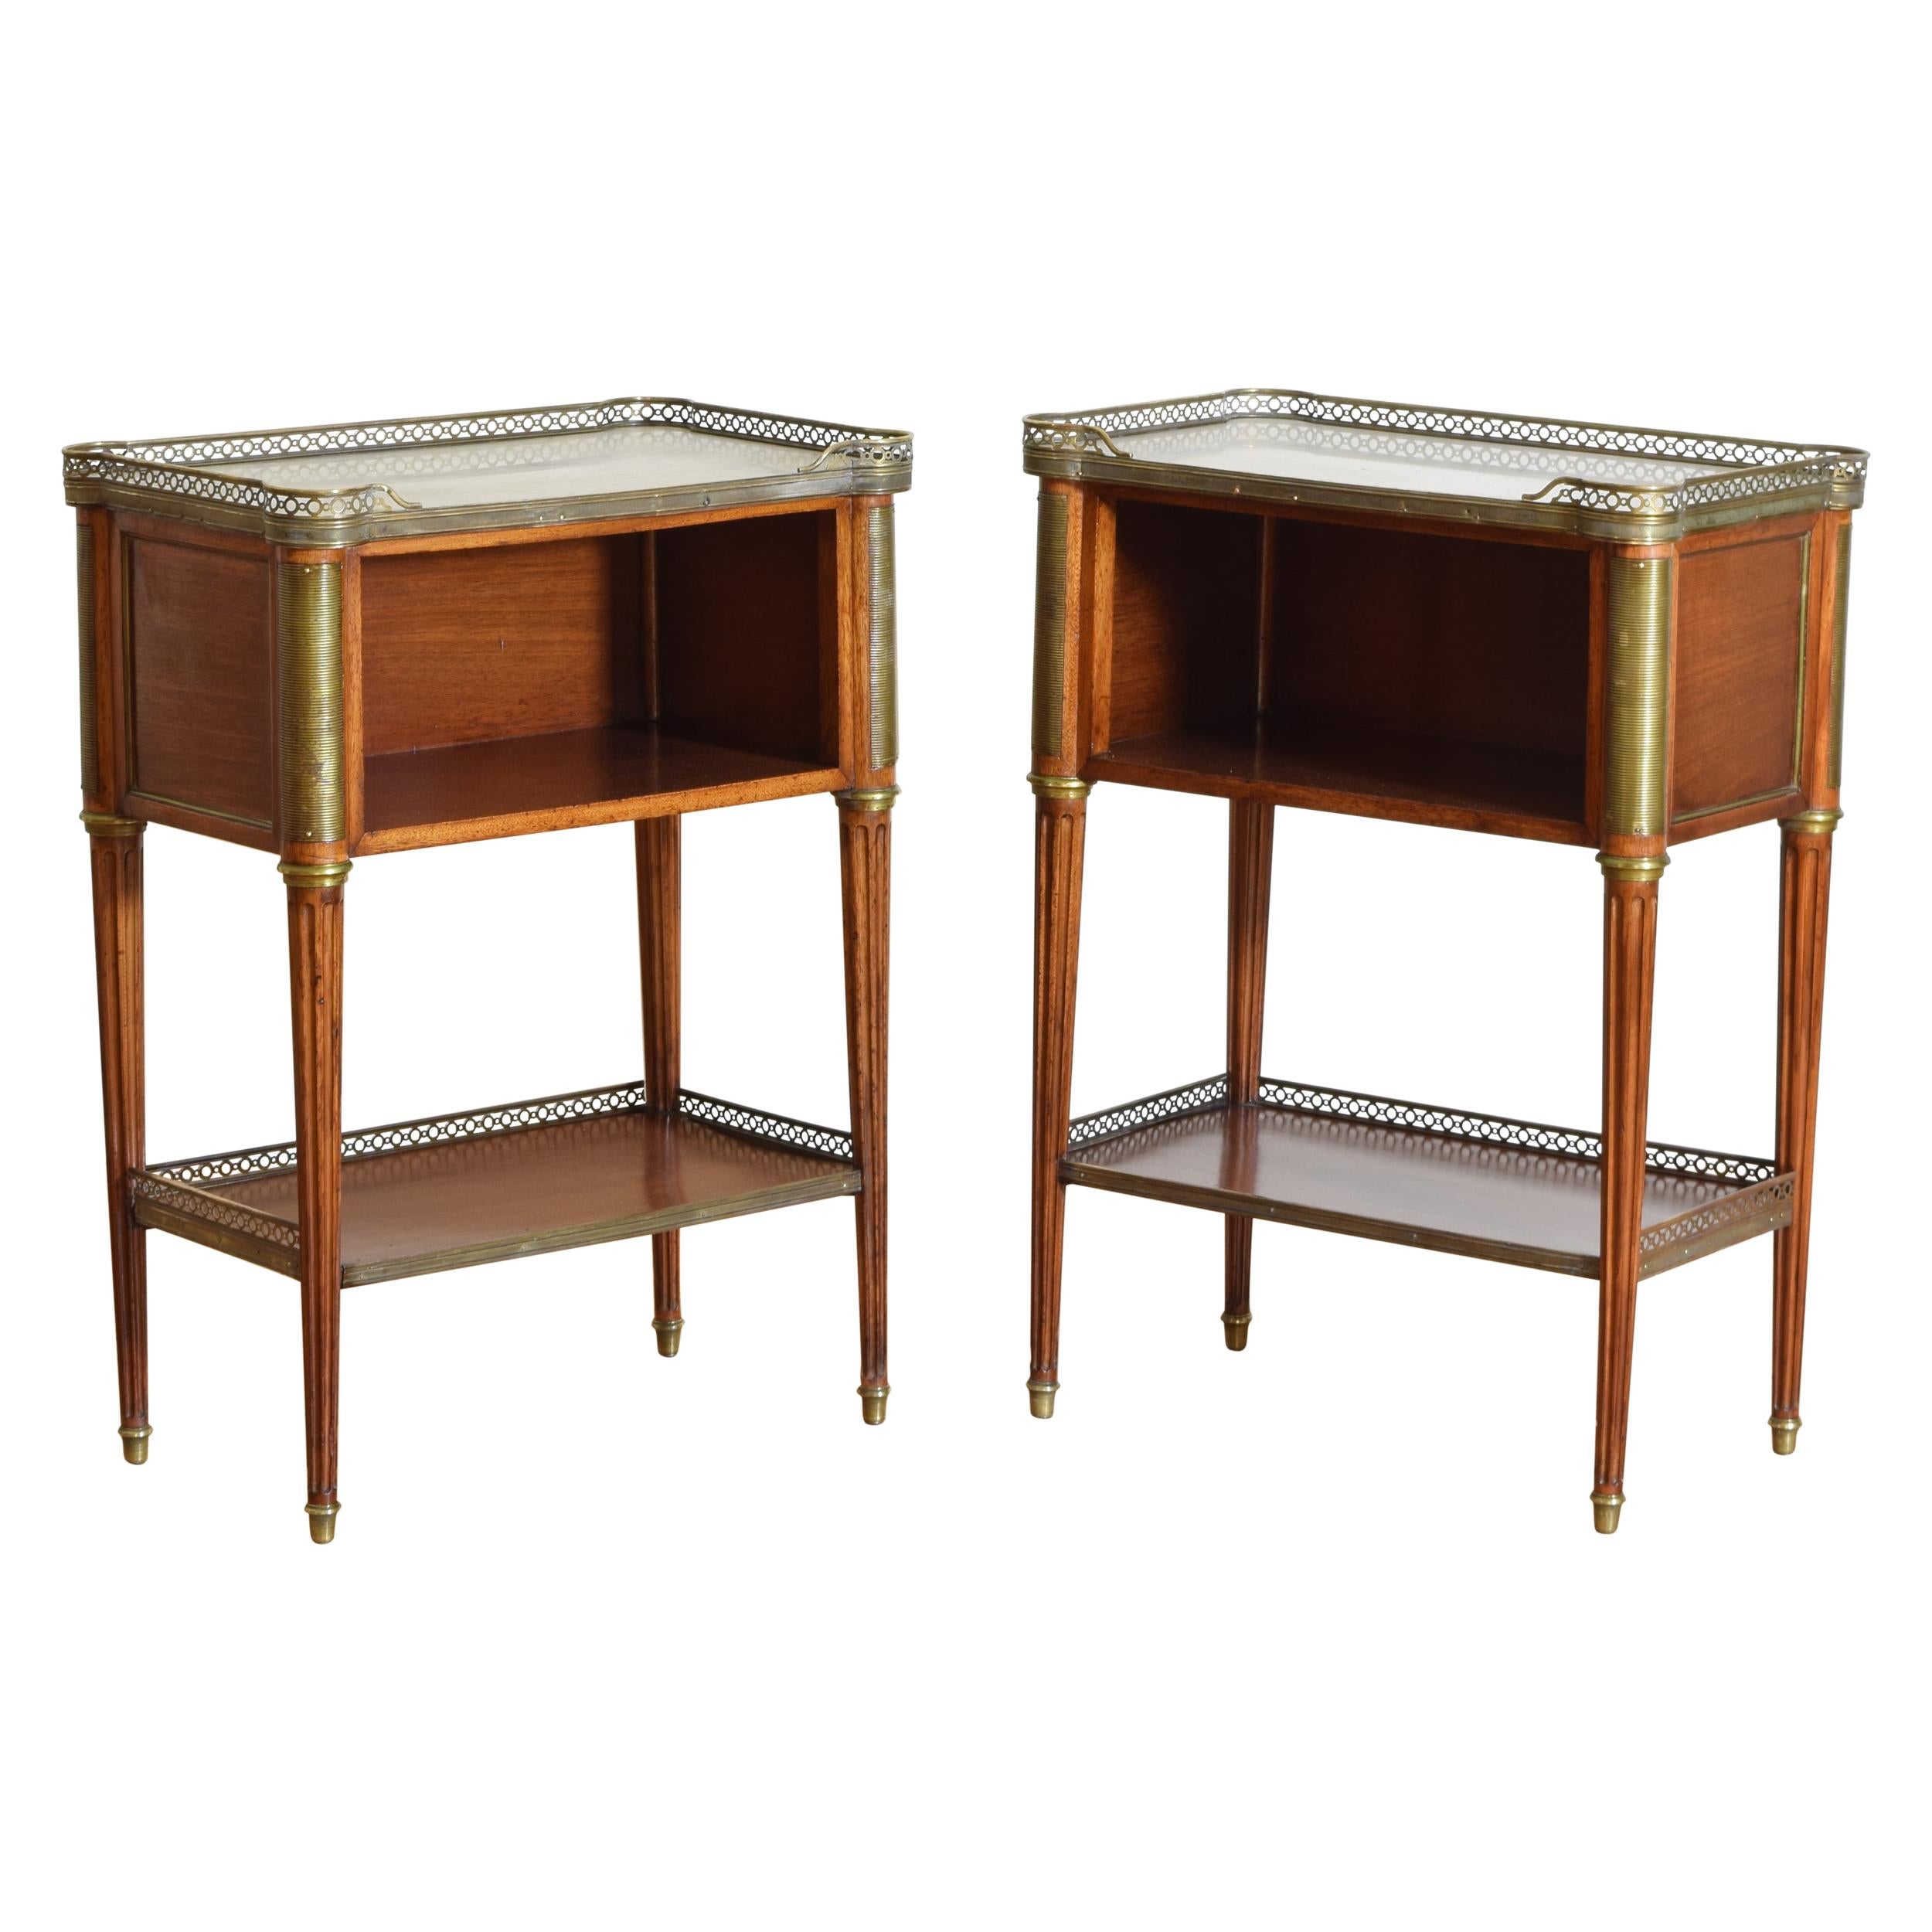 Pair French Mahogany and Brass Mounted Louis XVI Style Side Cabinets, Late 19thc